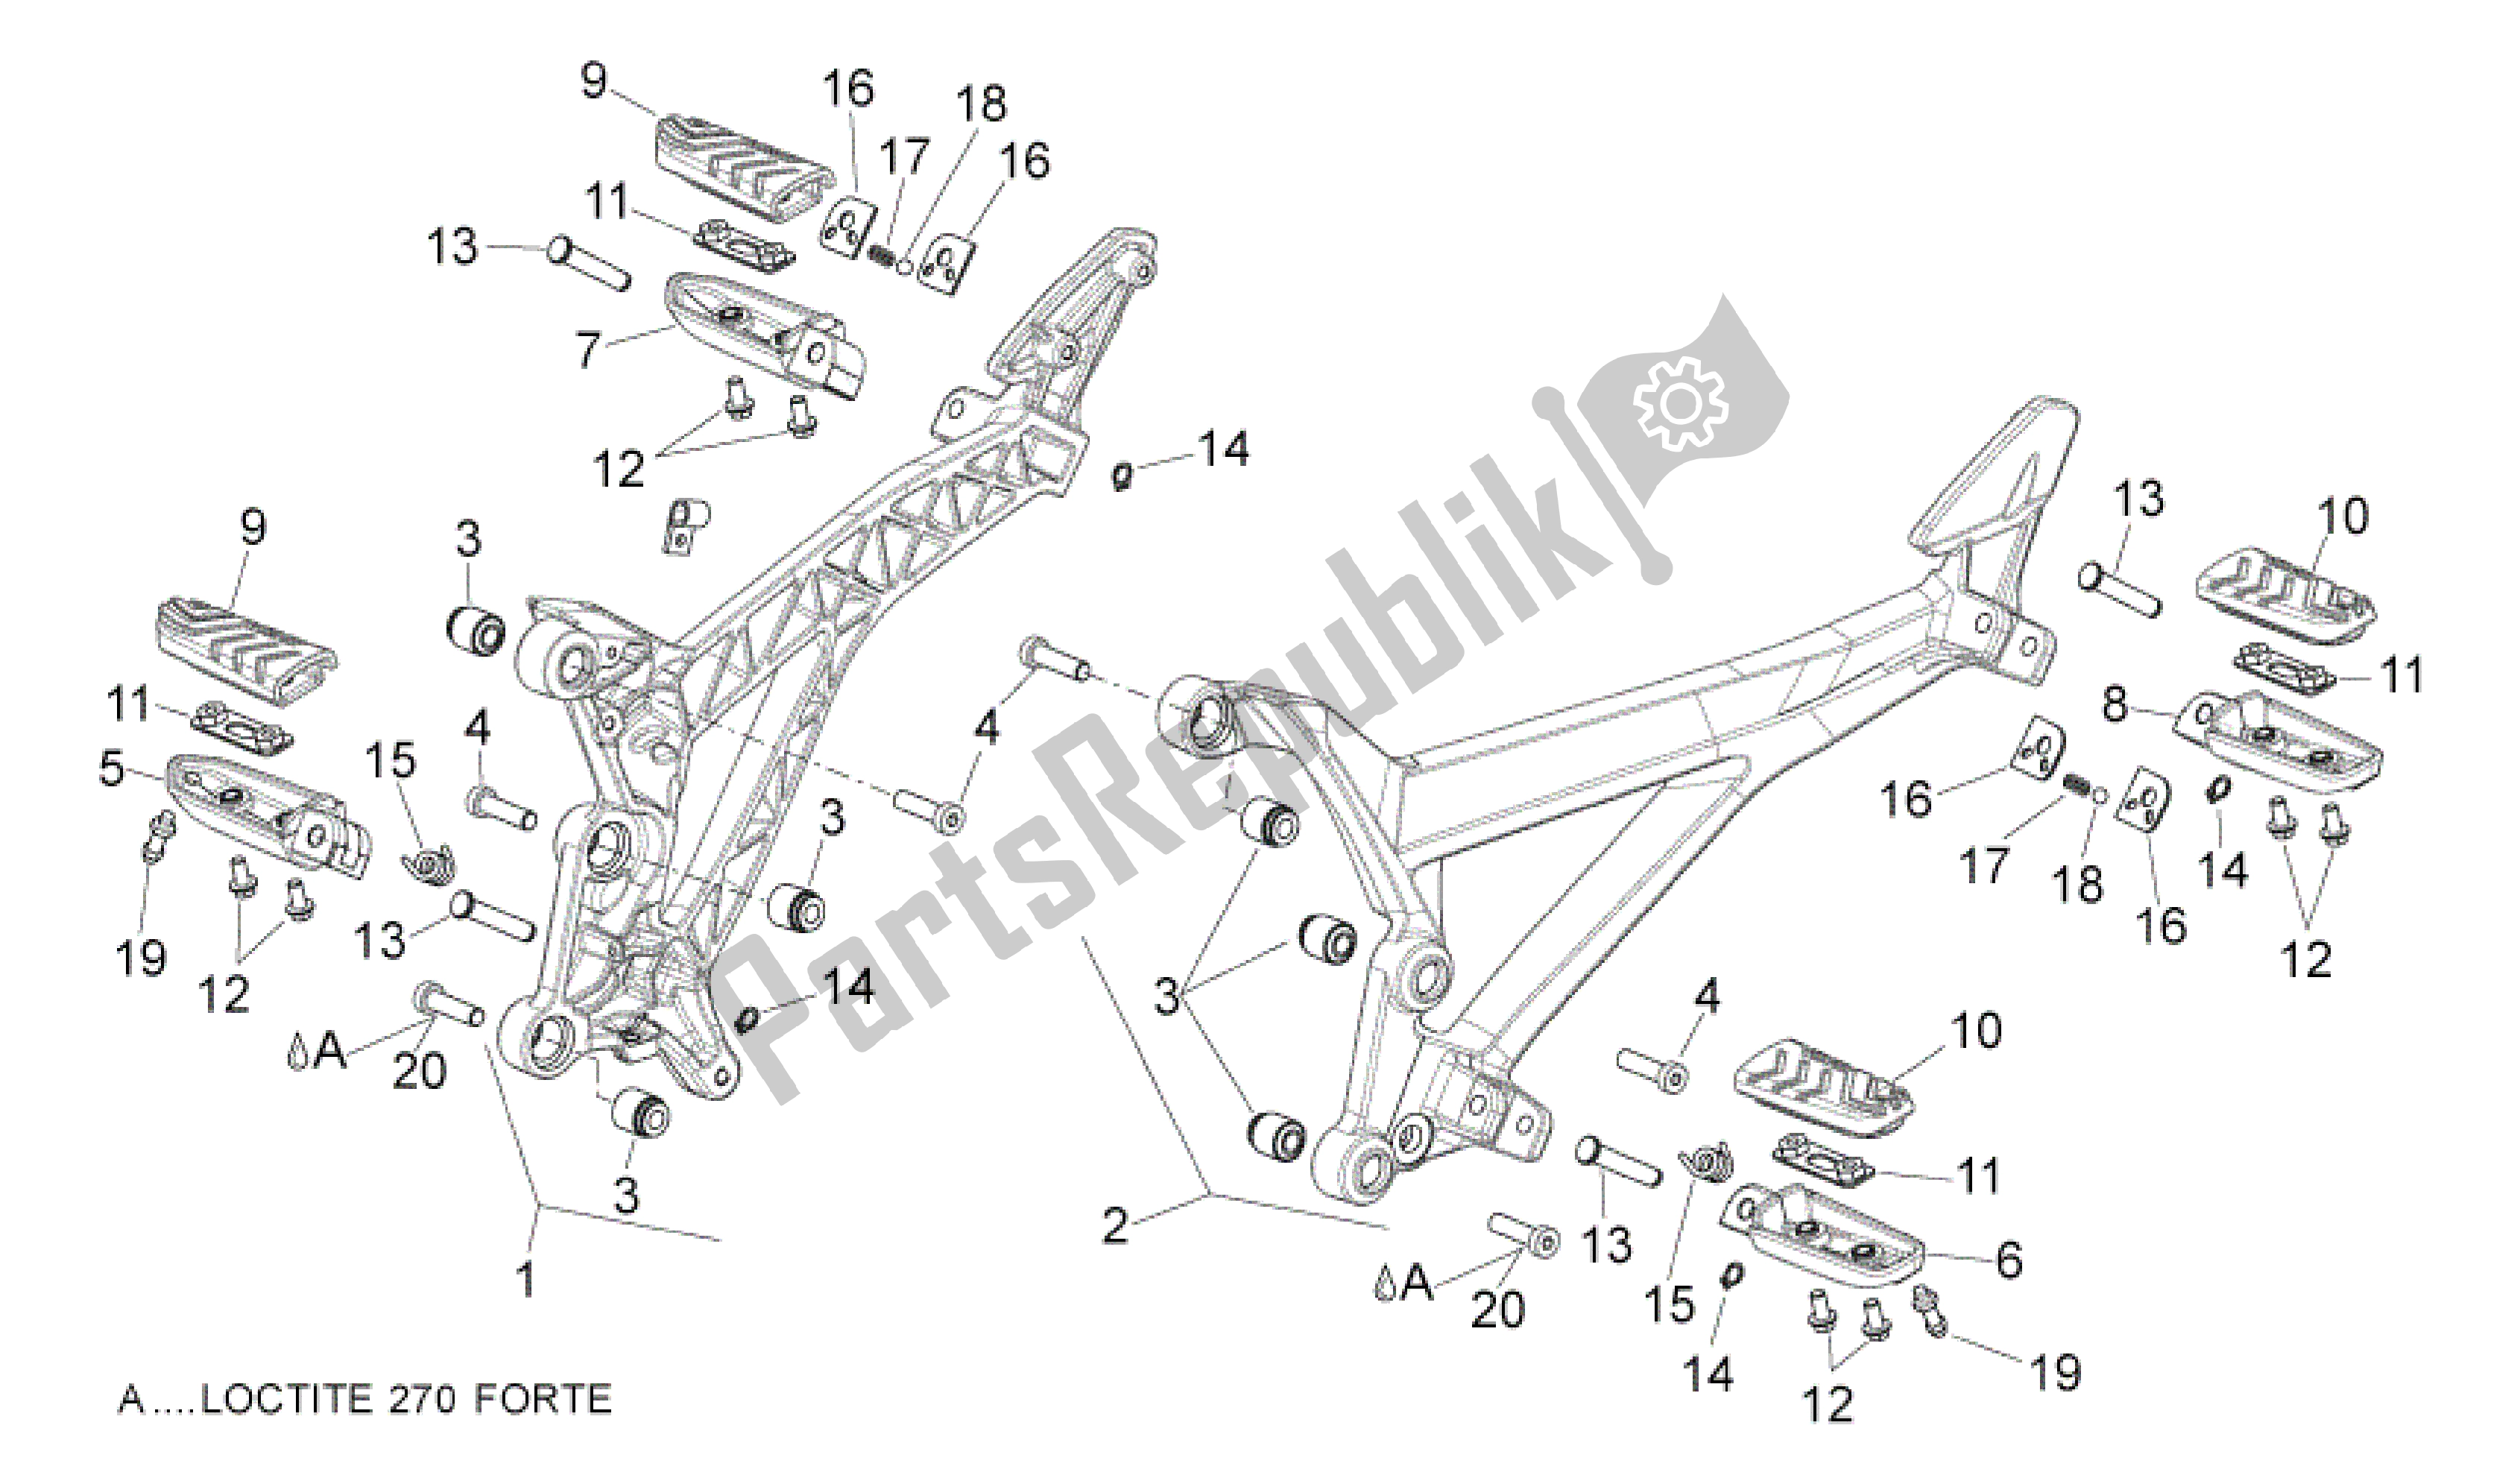 All parts for the Foot Rests of the Aprilia Shiver 750 2007 - 2009